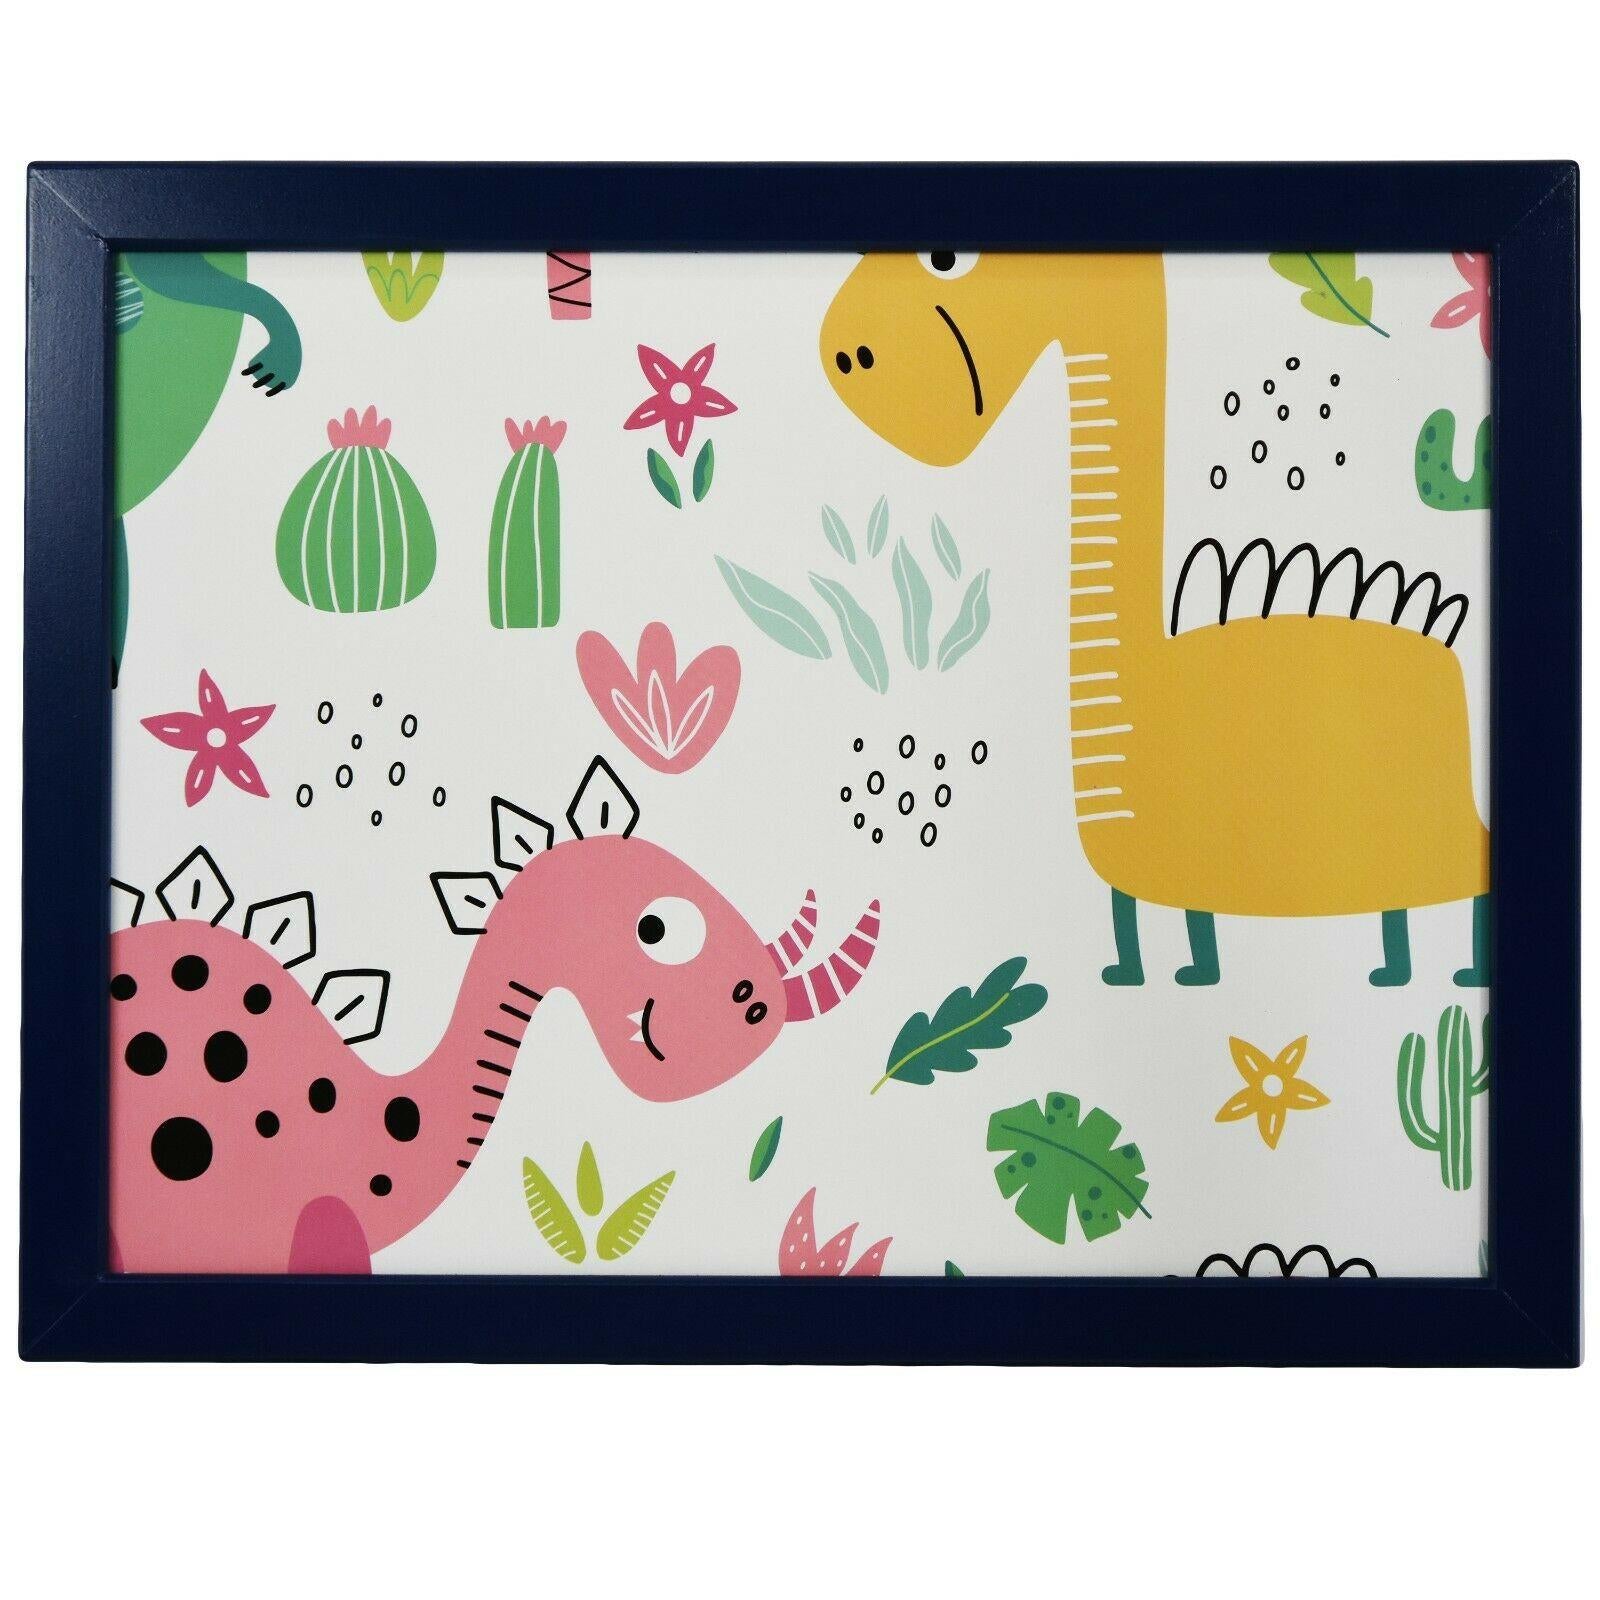 Dinosaurs Lap Tray With Bean Bag Cushion by Geezy - UKBuyZone